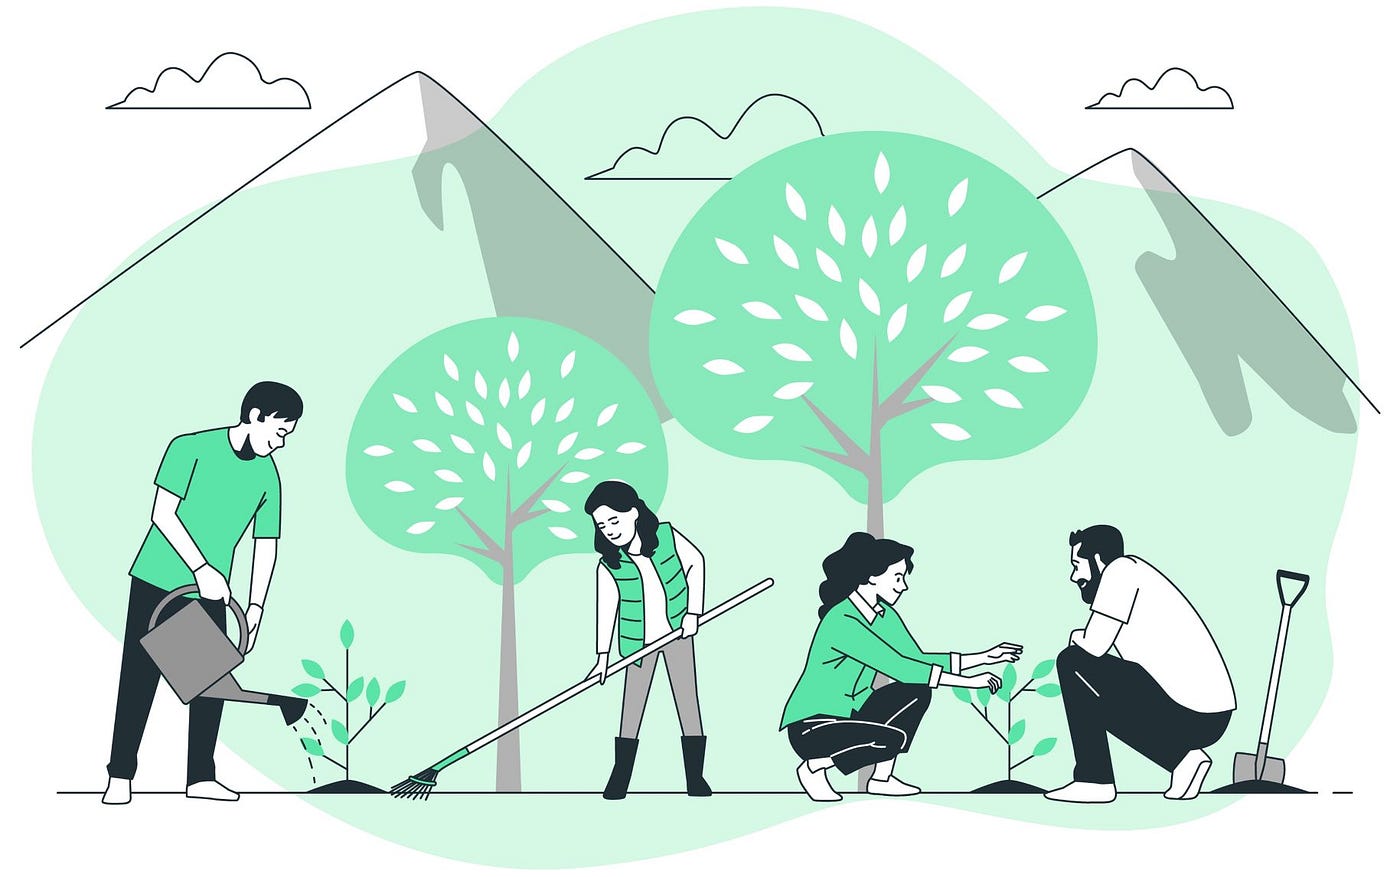 People gardening together in nature against a backdrop of mountains and trees.